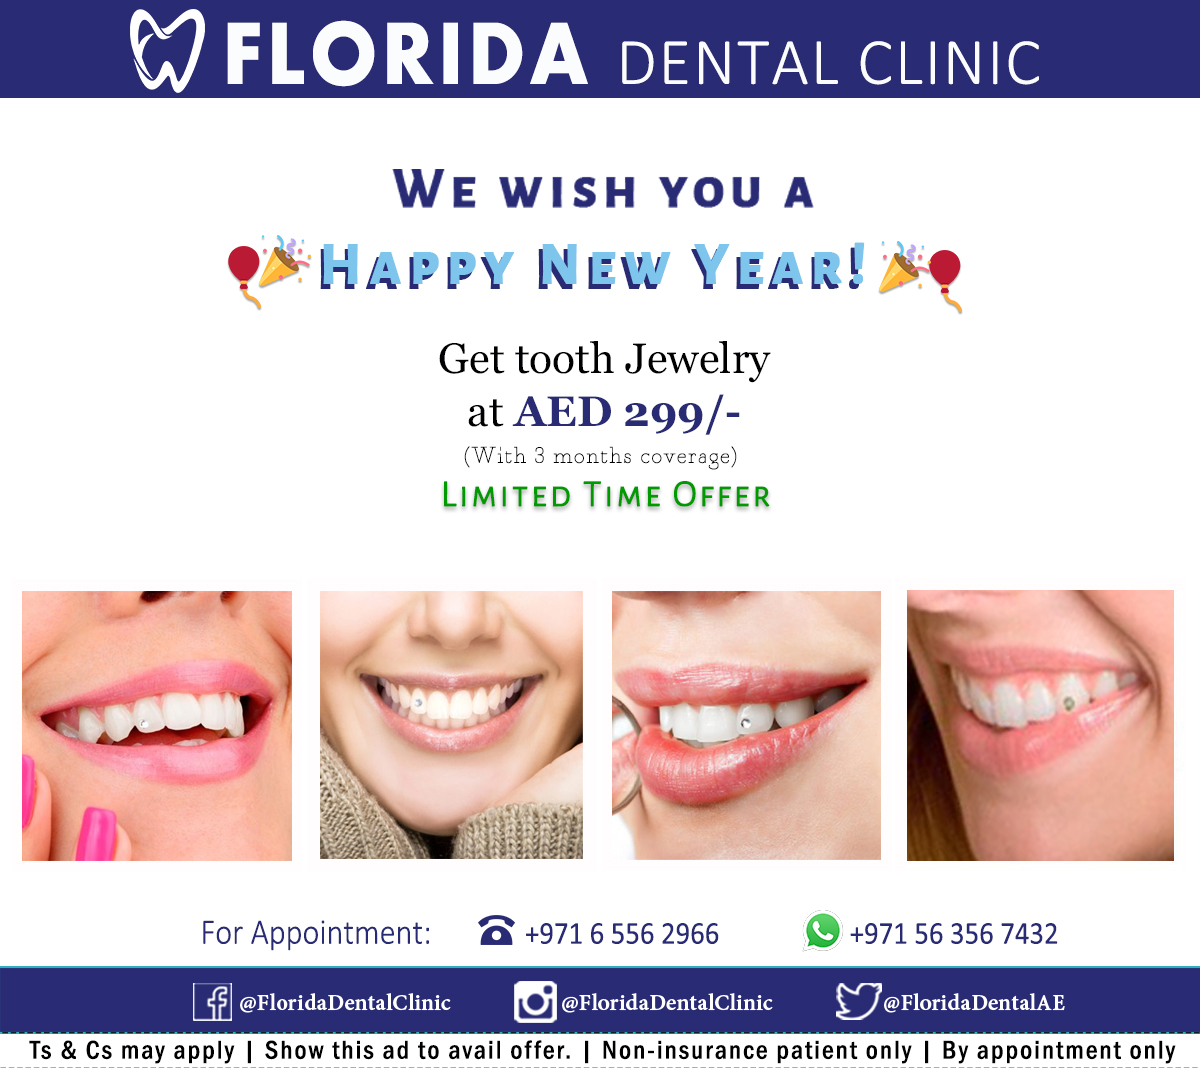 Florida Dental Clinic wishes you a #HappyNewYear 🎆🎈🎉 Get tooth jewellery at AED 299/- #FloridaDentalClinic #2020 #happynewyear2020 #newyeareve #smile #toothjewelry #toothgems #dentist #dentistinsharjah #dentalclinic #sharjah #whiteteeth #hollywoodsmile